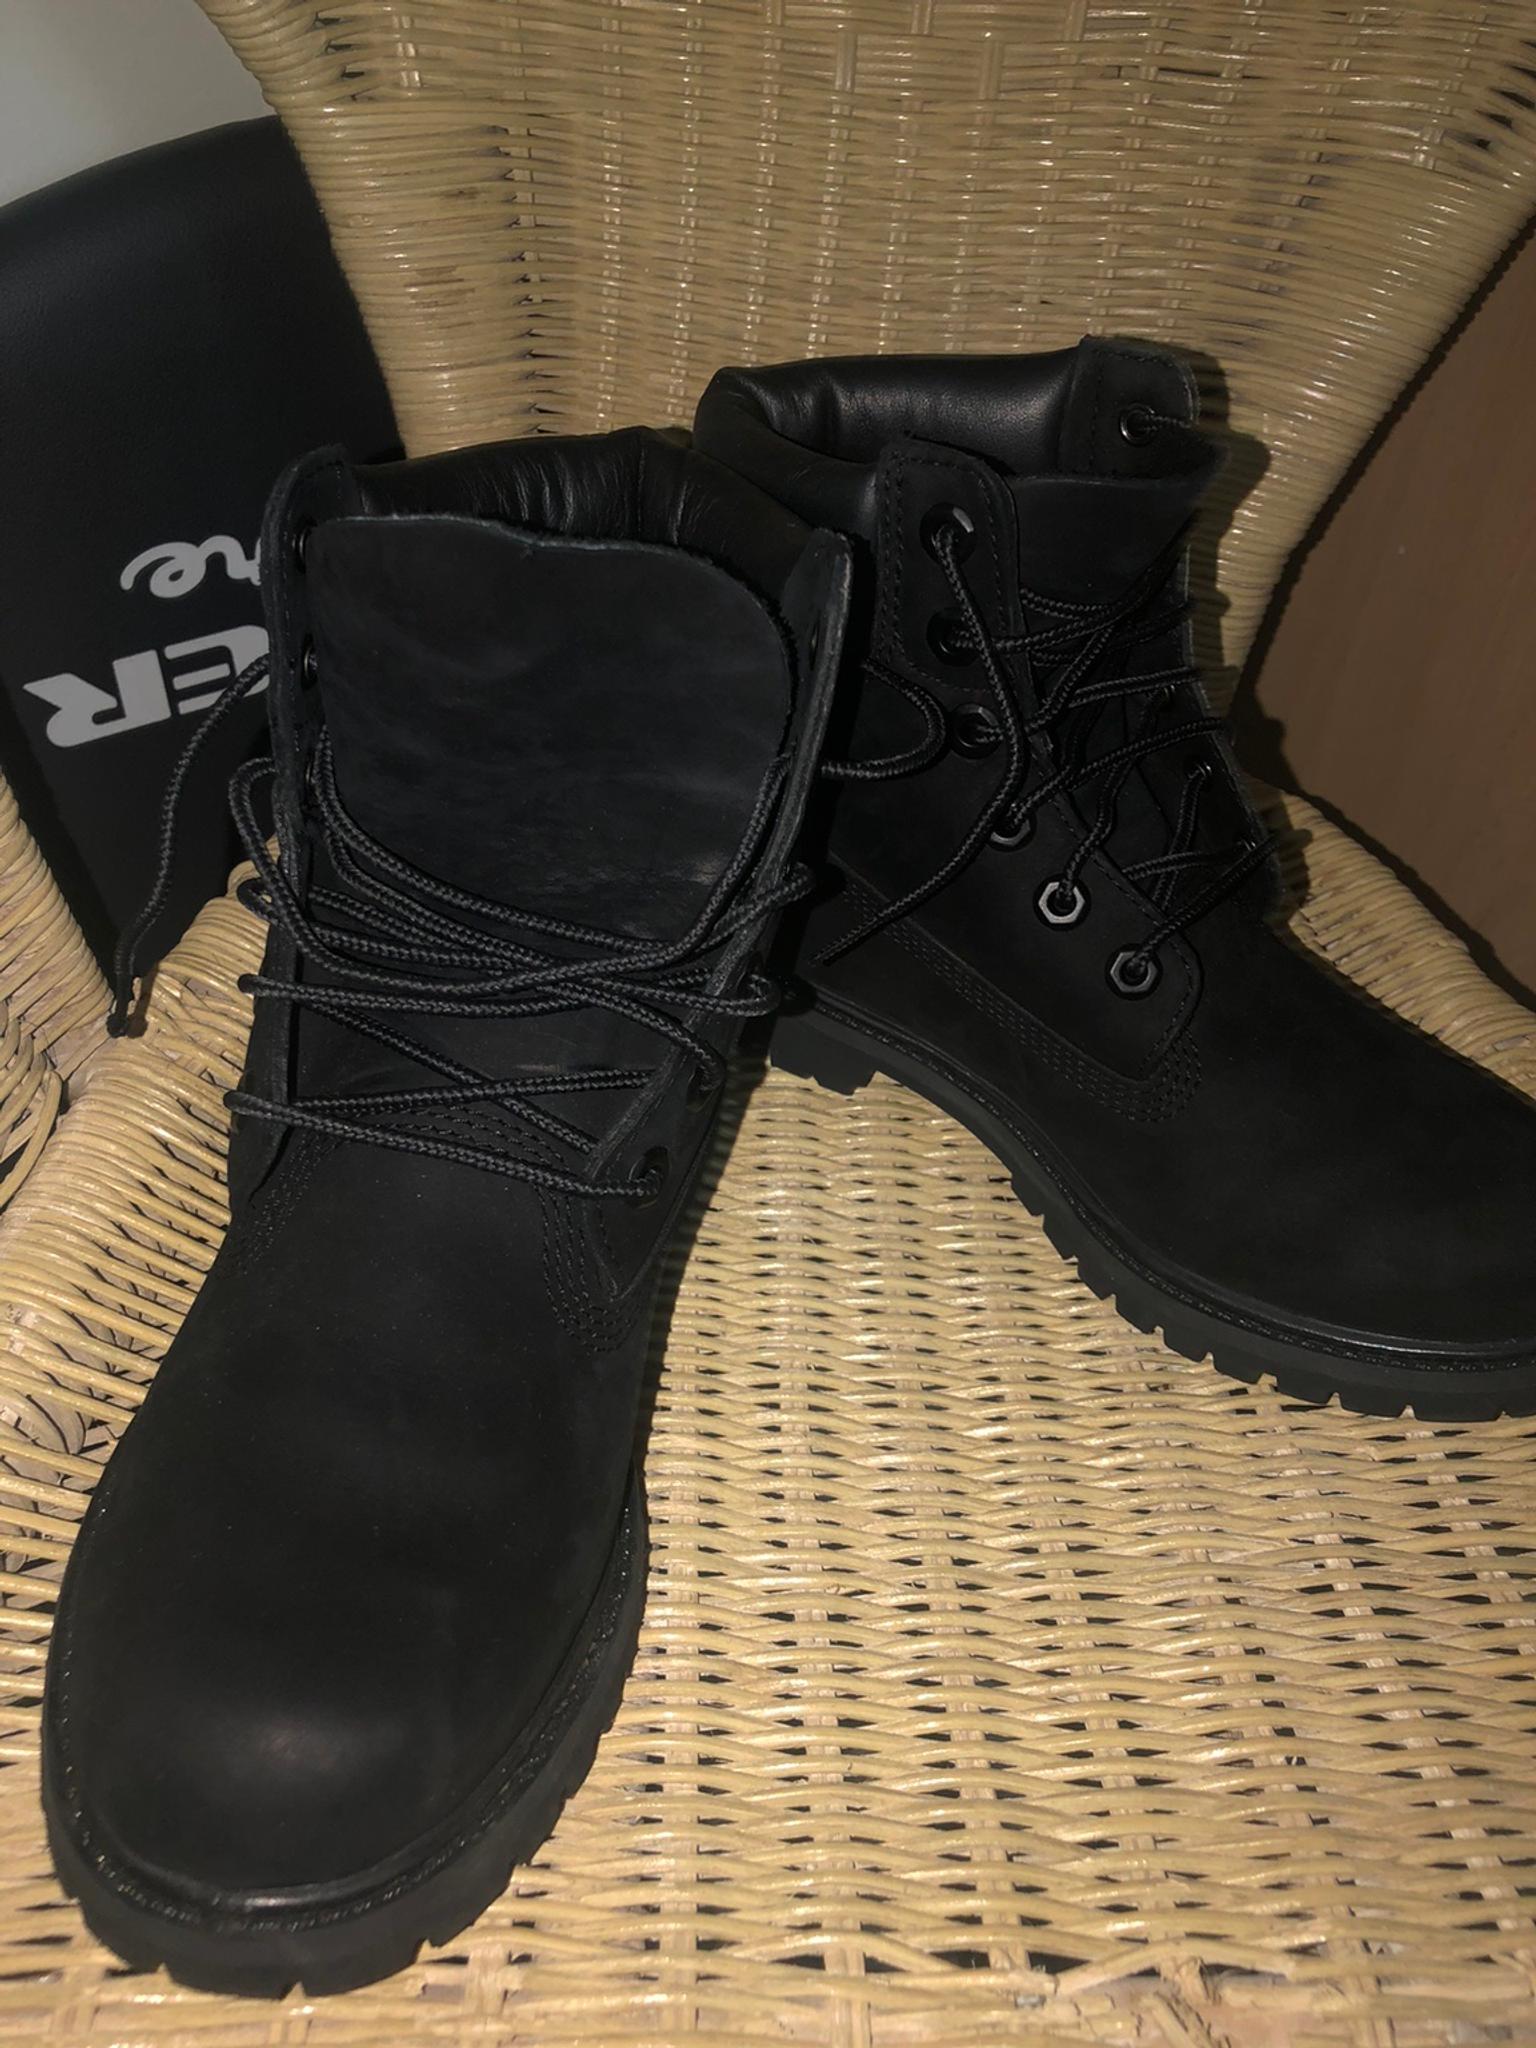 Black timberland boots size 5 in N5 